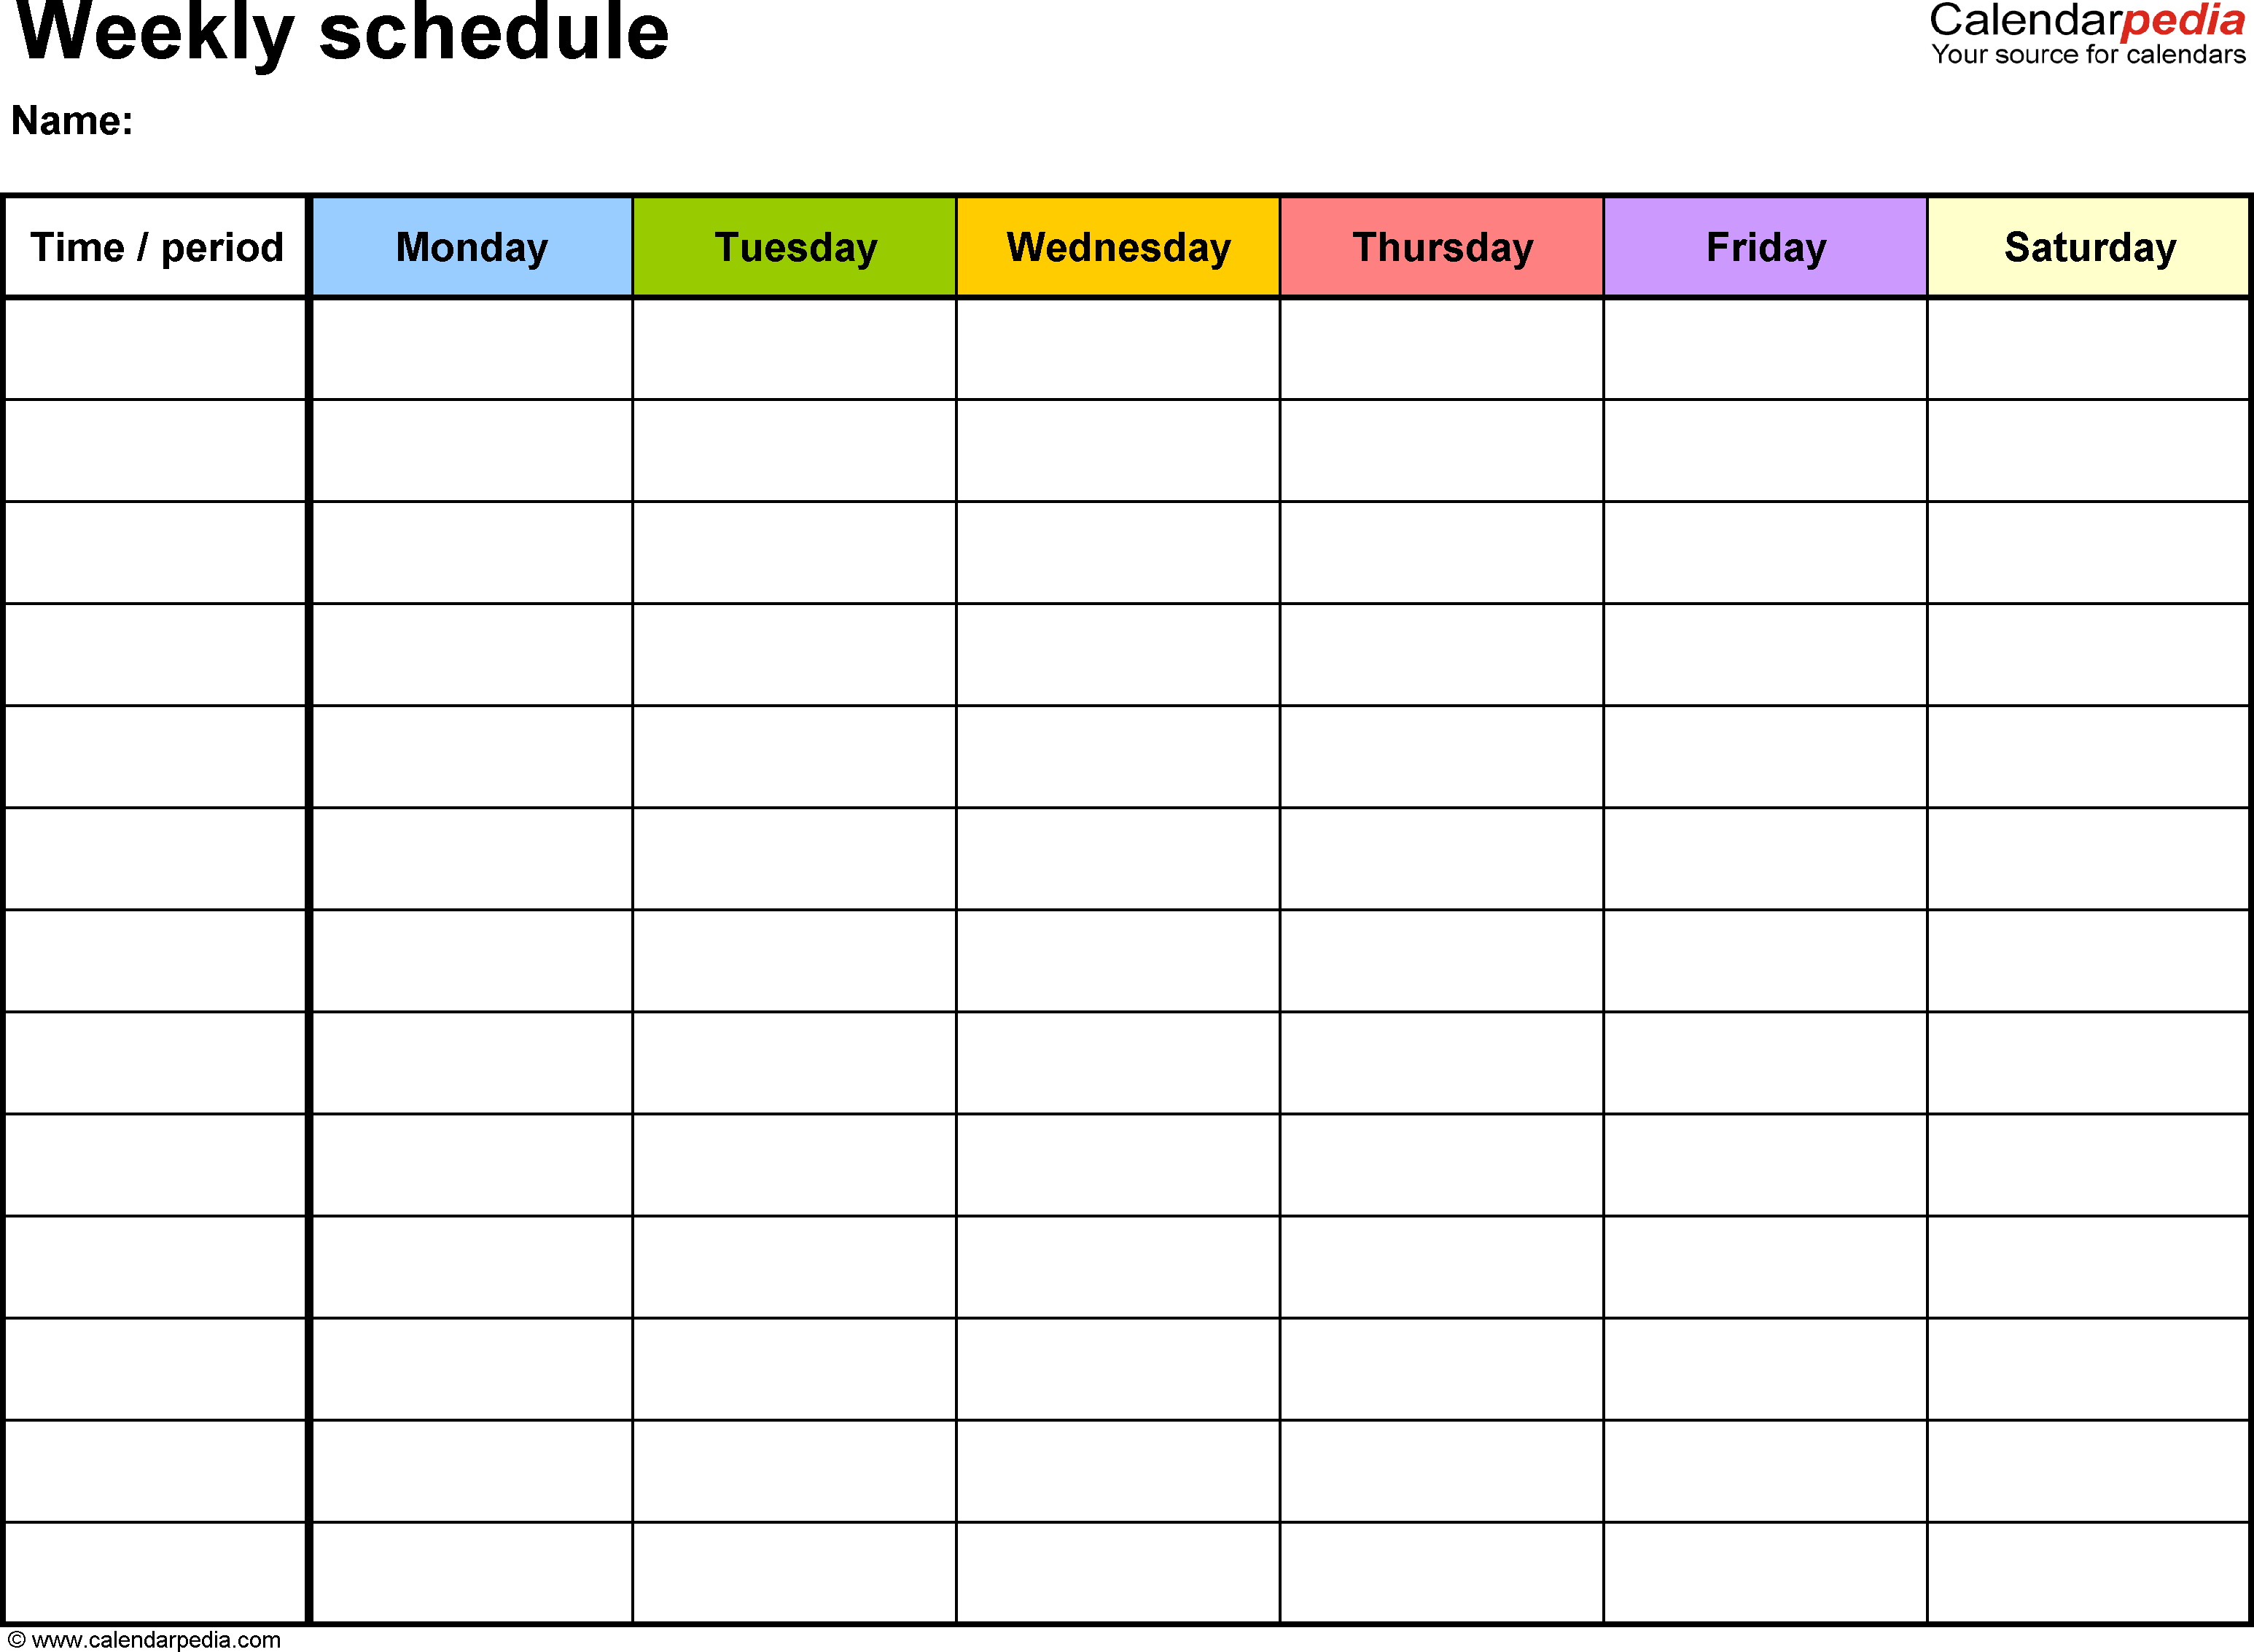 Weekly+Schedule+Template | Weekly Calendar Template intended for Printable Calendar With Times Slots